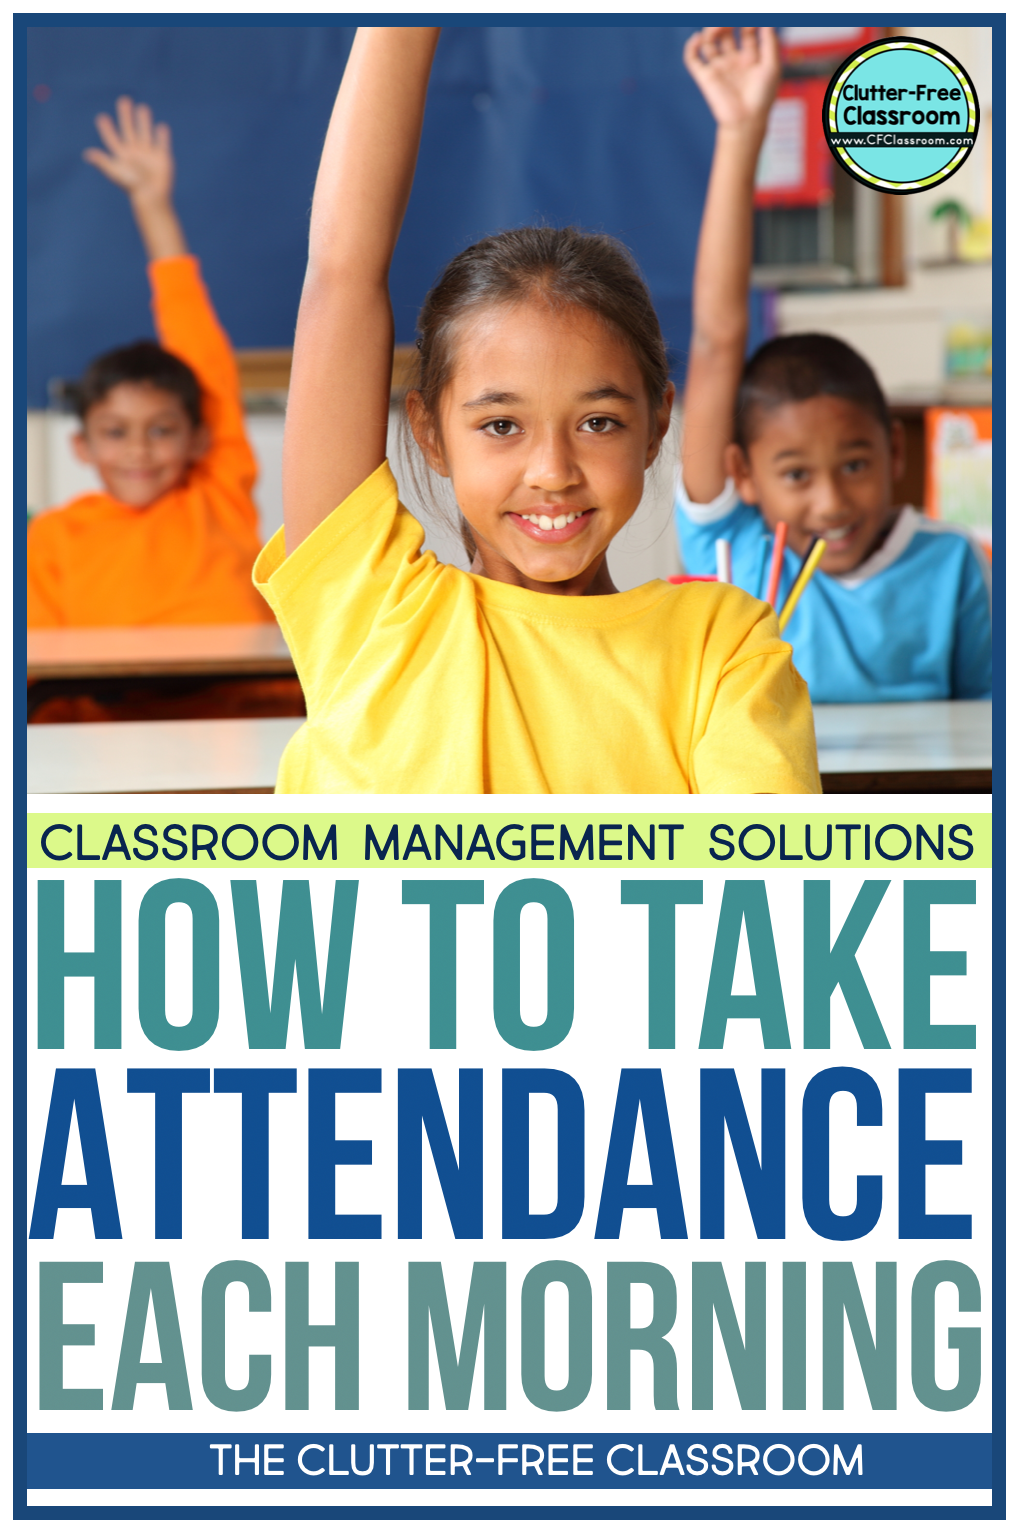 Learn how to take attendance using an attendance tracker, morning activities, and elementary procedures using easy routines and classroom management strategies from the Clutter Free Classroom. Make taking attendance fun!